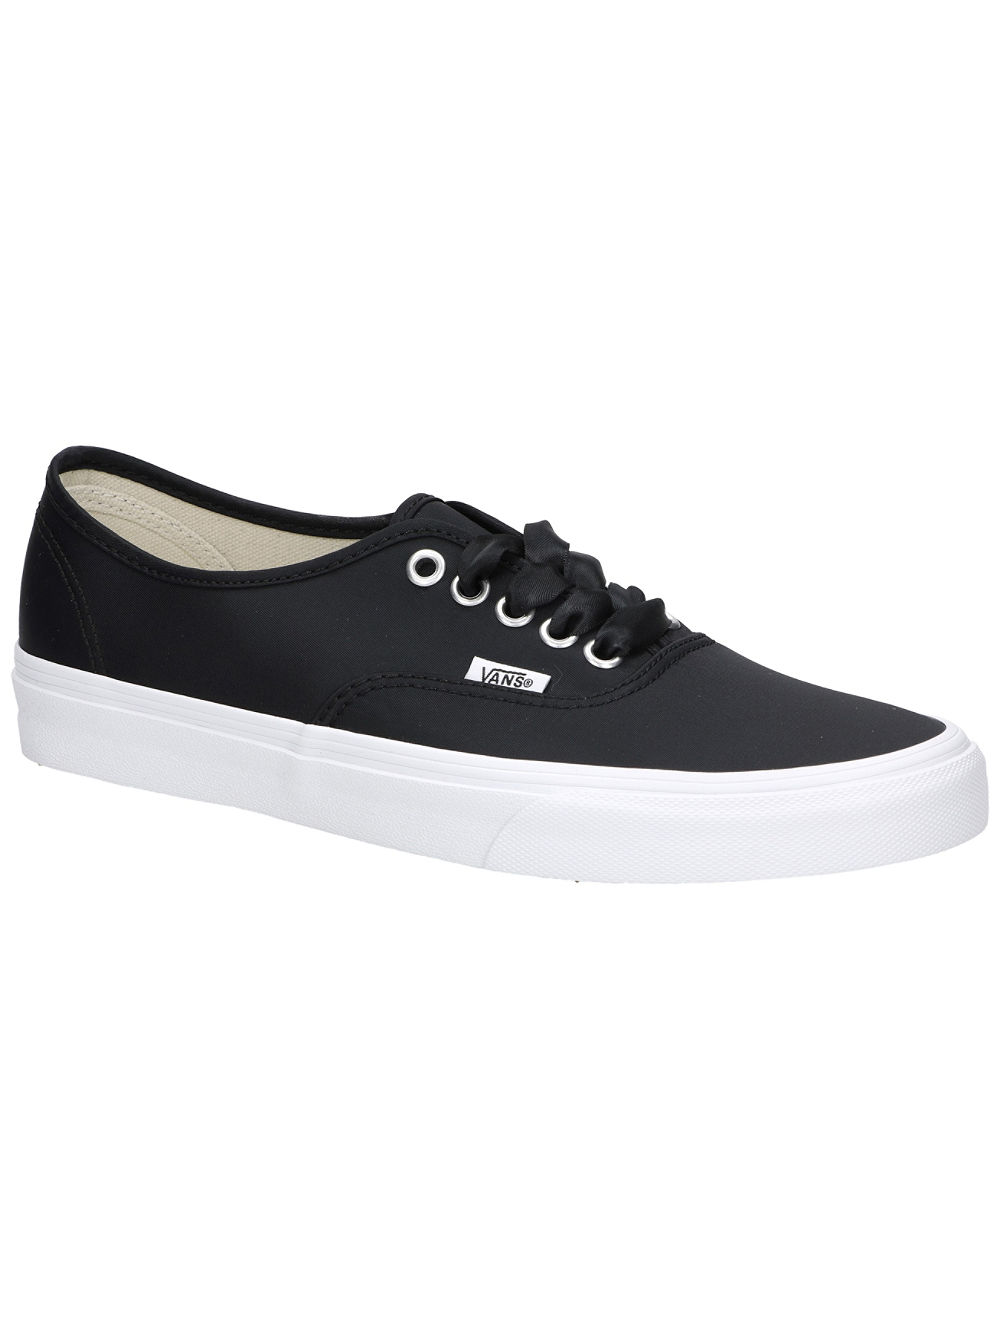 Satin Lux Authentic Sneakers